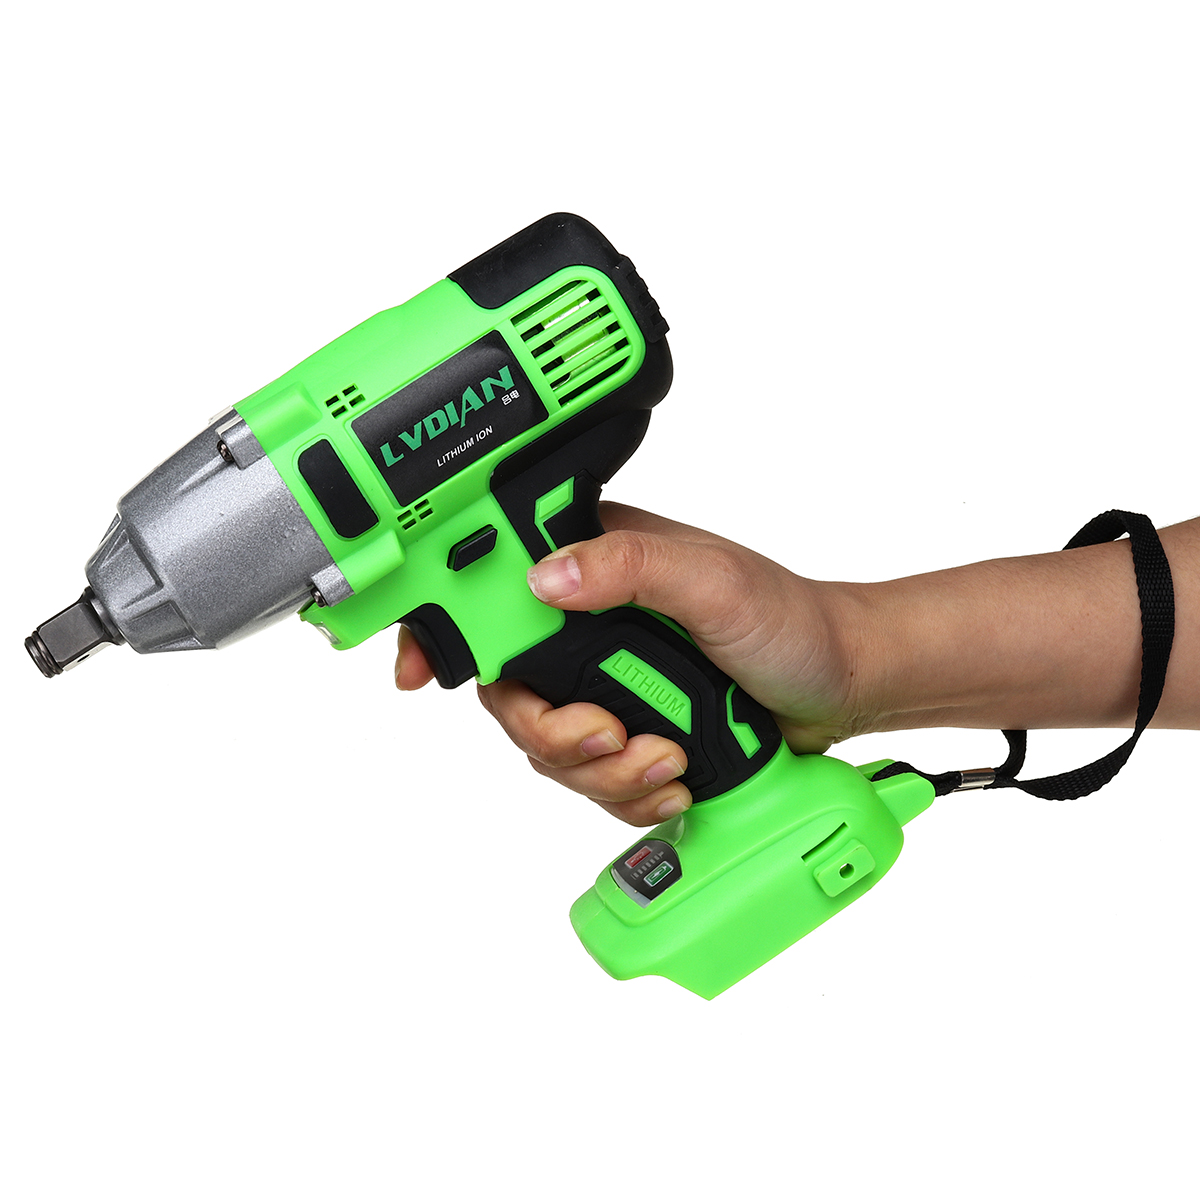 500-Nm-Cordless-Electric-Impact-Wrench-with-LED-lights-For-DIY-Home-Building-Engineering-Car-Repairi-1626910-8